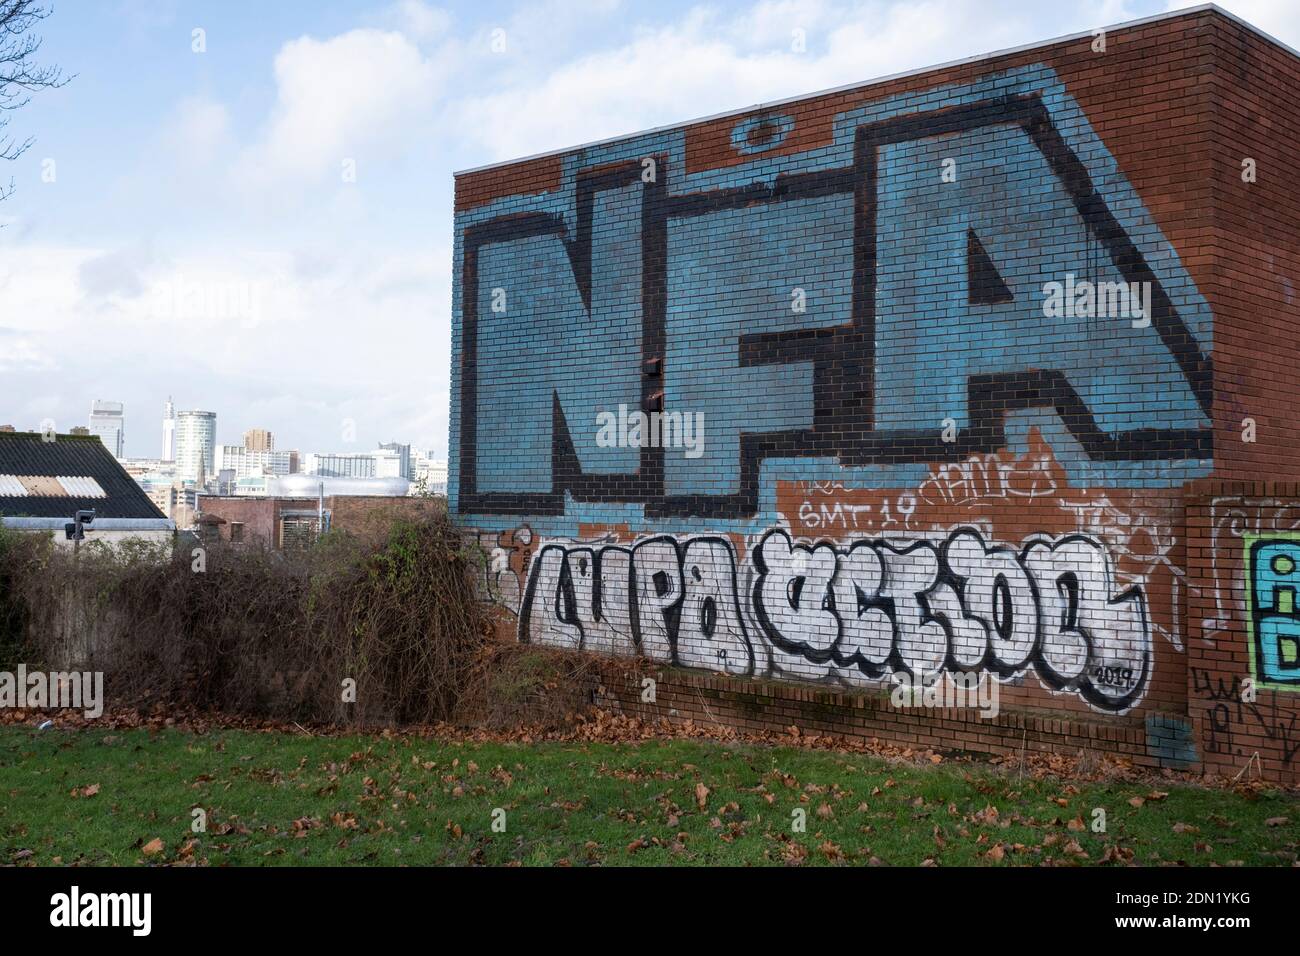 Large NFA graffiti crew letters sprayed on a wall in the inner city area of Highgate on 14th December 2020 in Birmingham, United Kingdom. This is a common signt in Birmingham, with the letters standing for expletive Not F-ing Around. Stock Photo